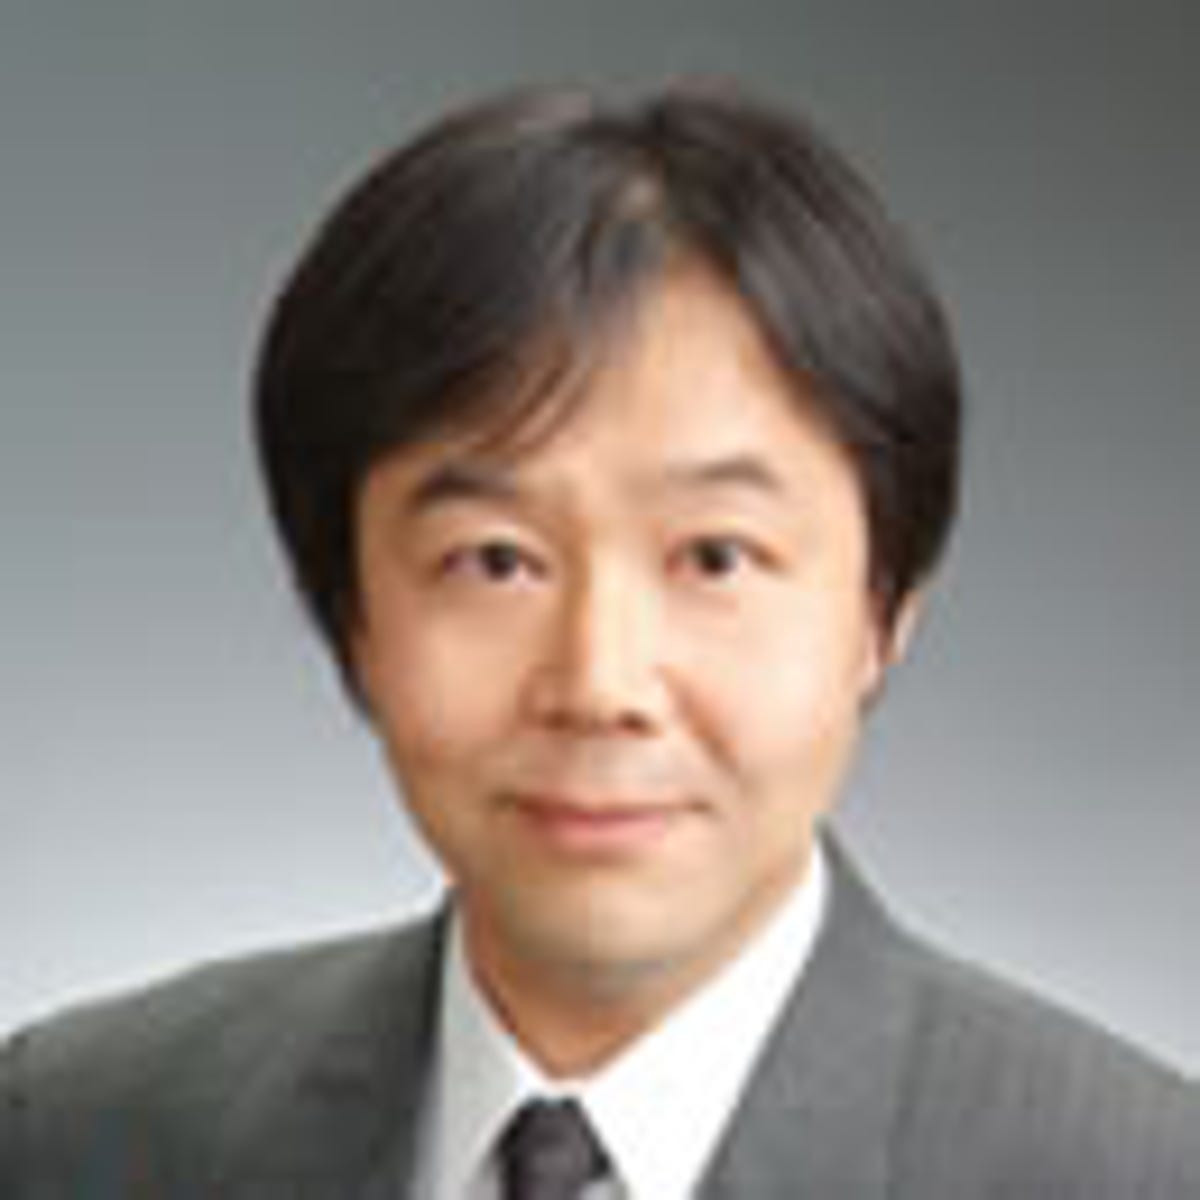 Waseda University's Hironori Kasahara wrote software for chips that Japanese companies are developing